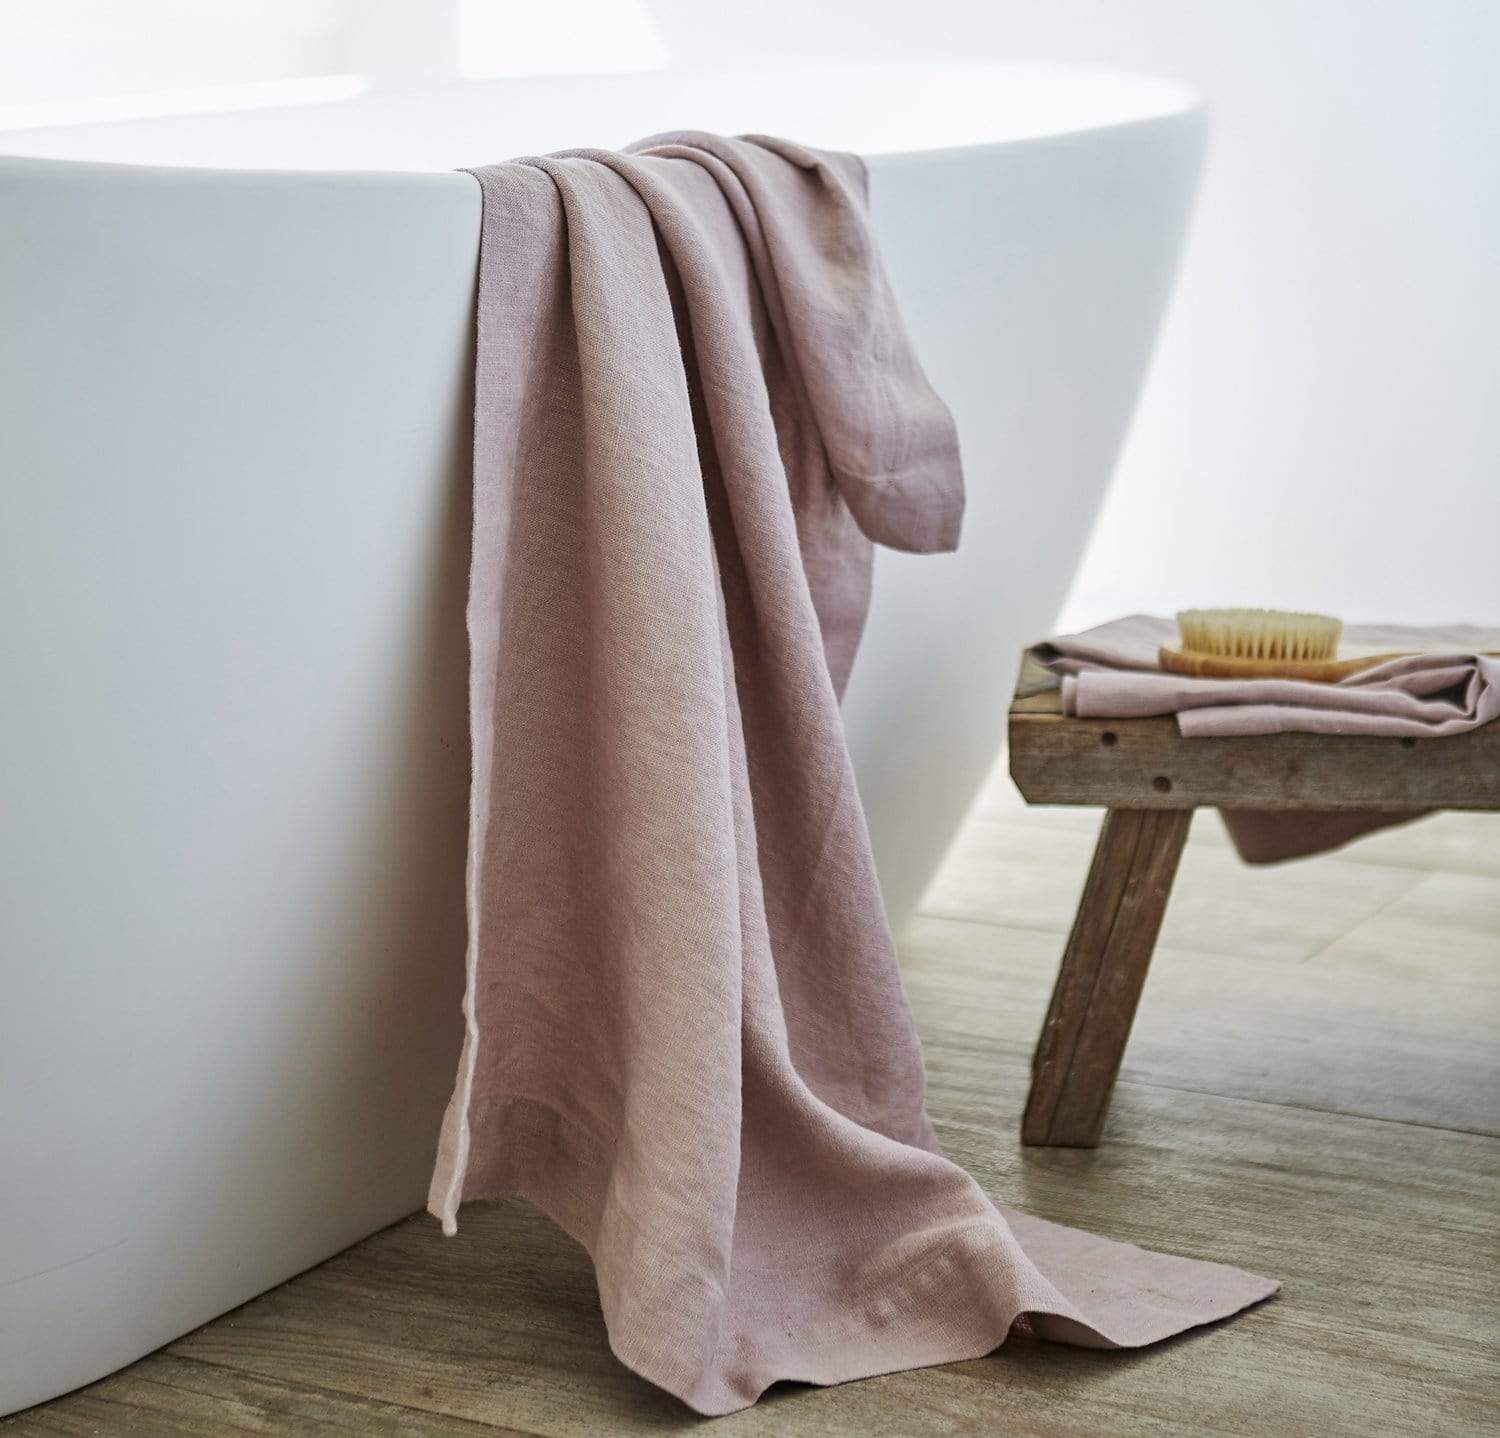 bathtub with 100% linen bath sheet heavyweight Orkney linen fabric sturdy antimicrobial large bath towel rose light pink color